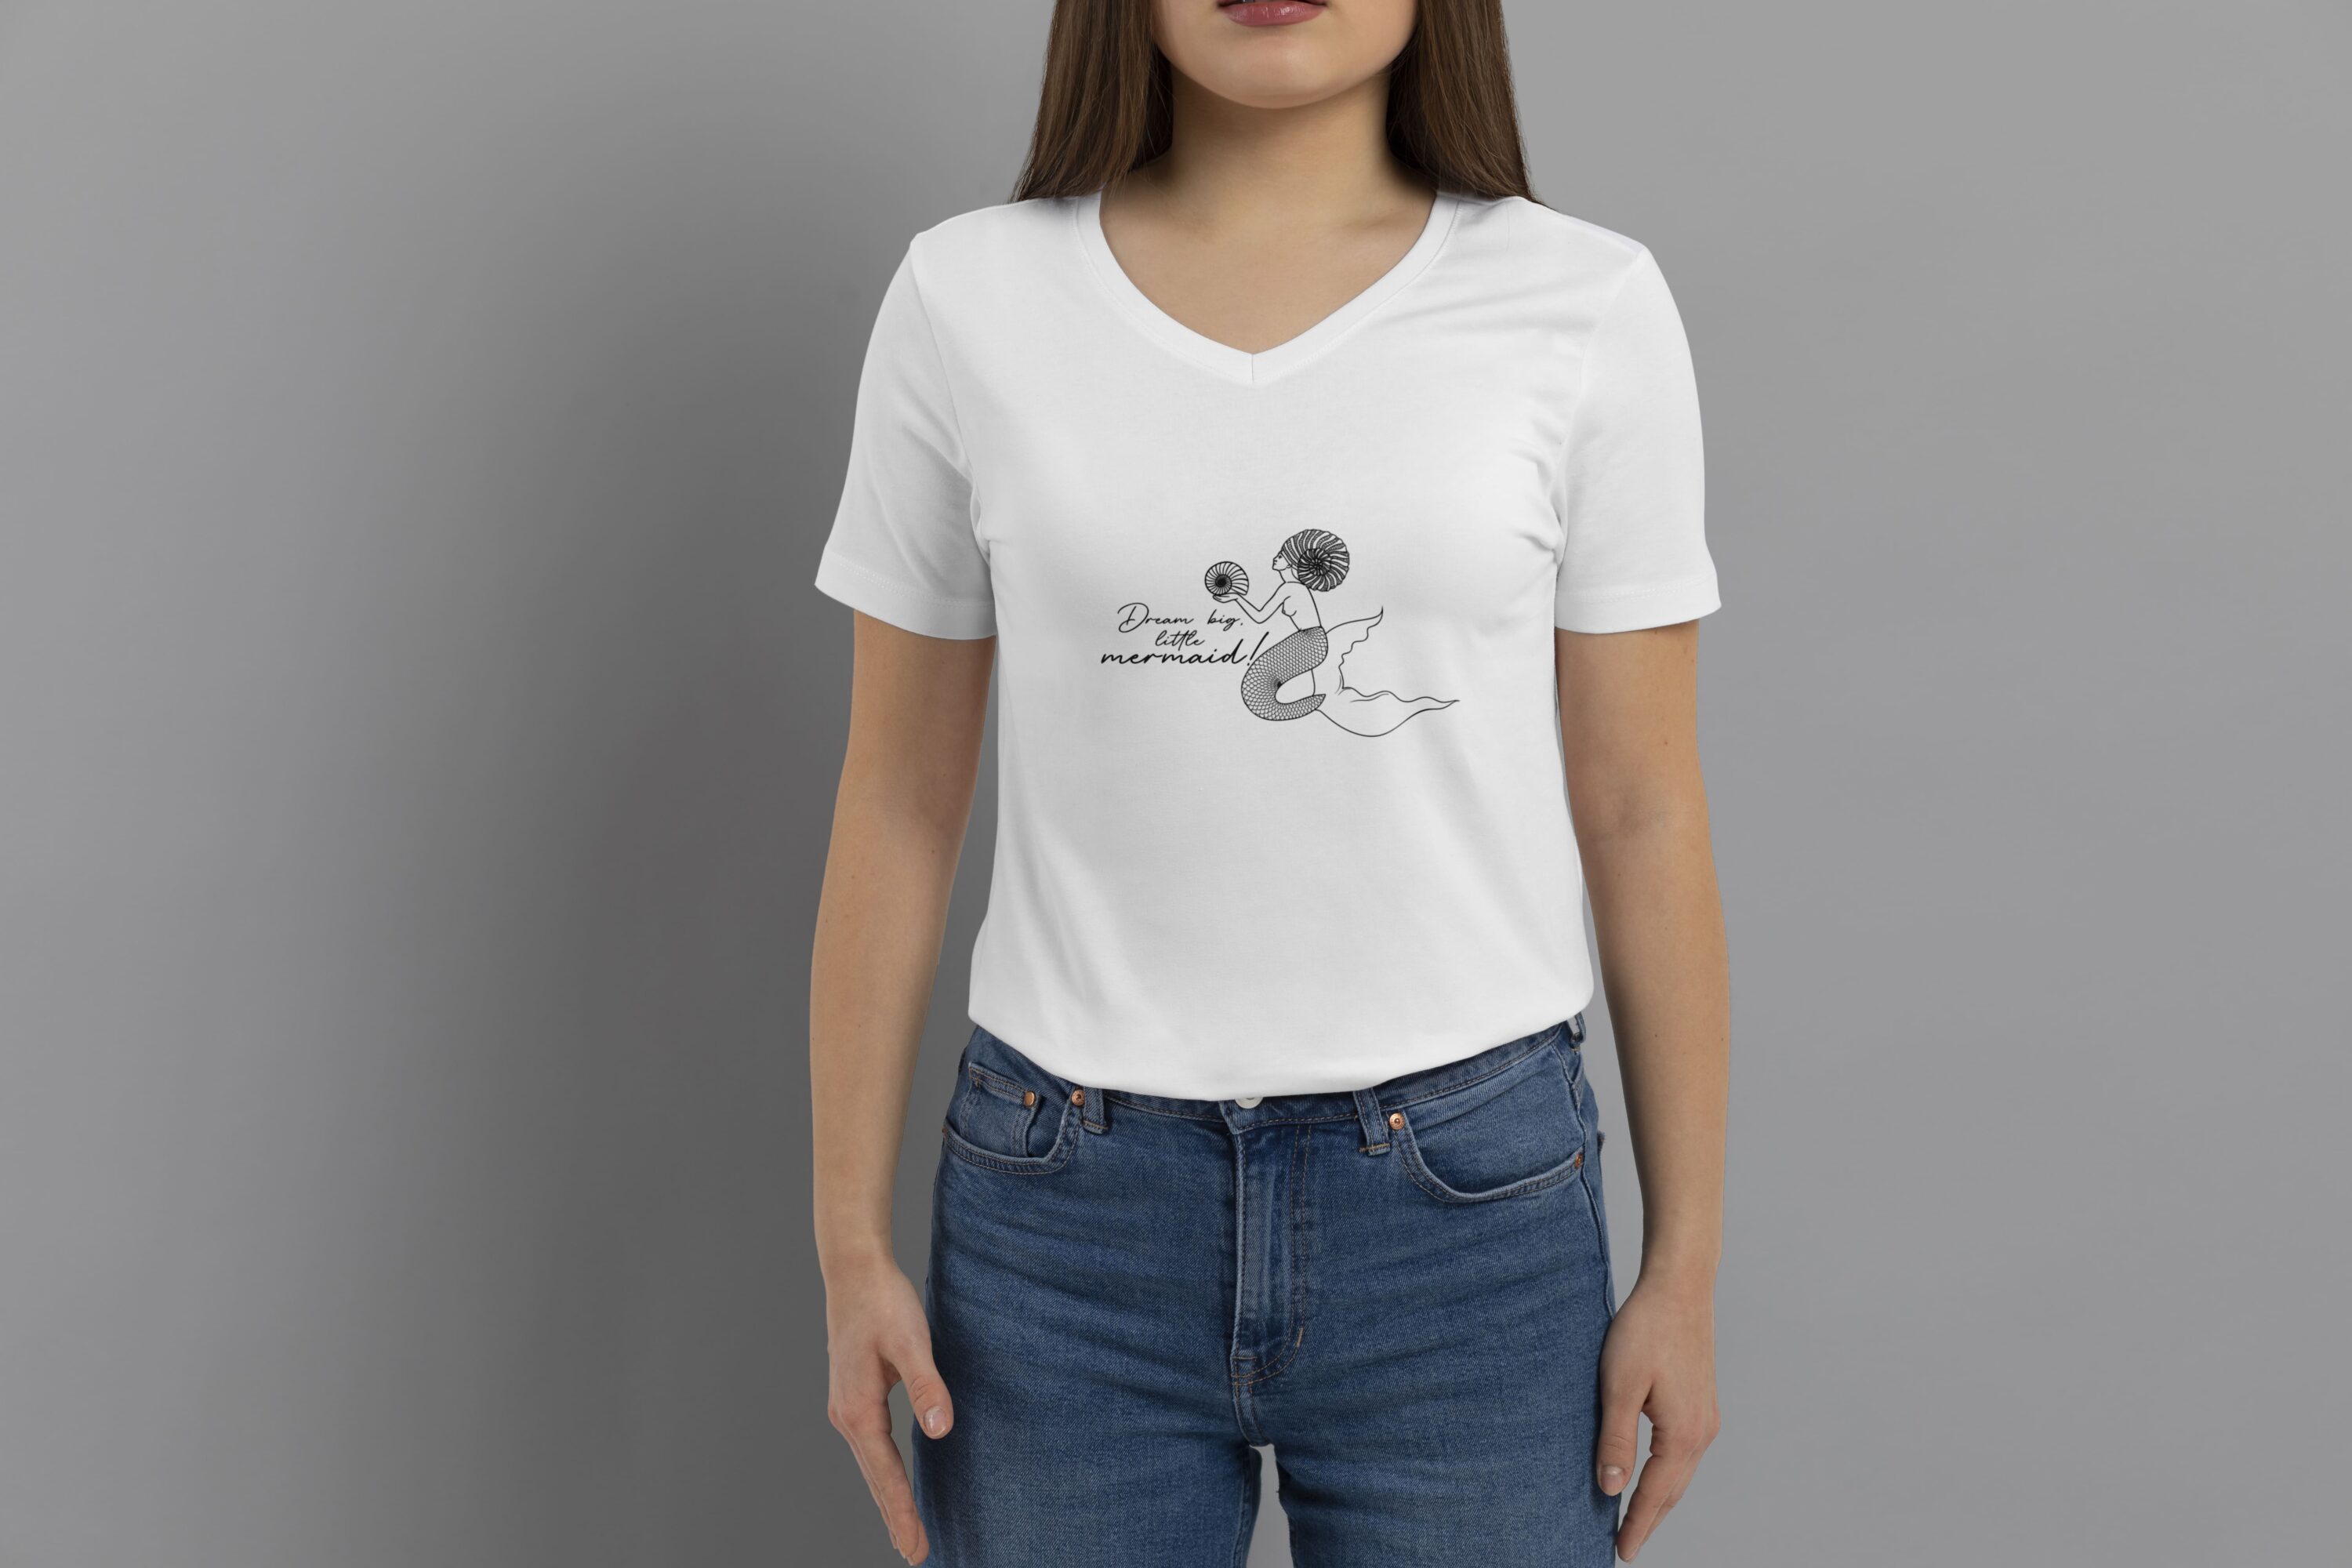 Havre print of mermaids on a T-shirt of a girl in jeans.